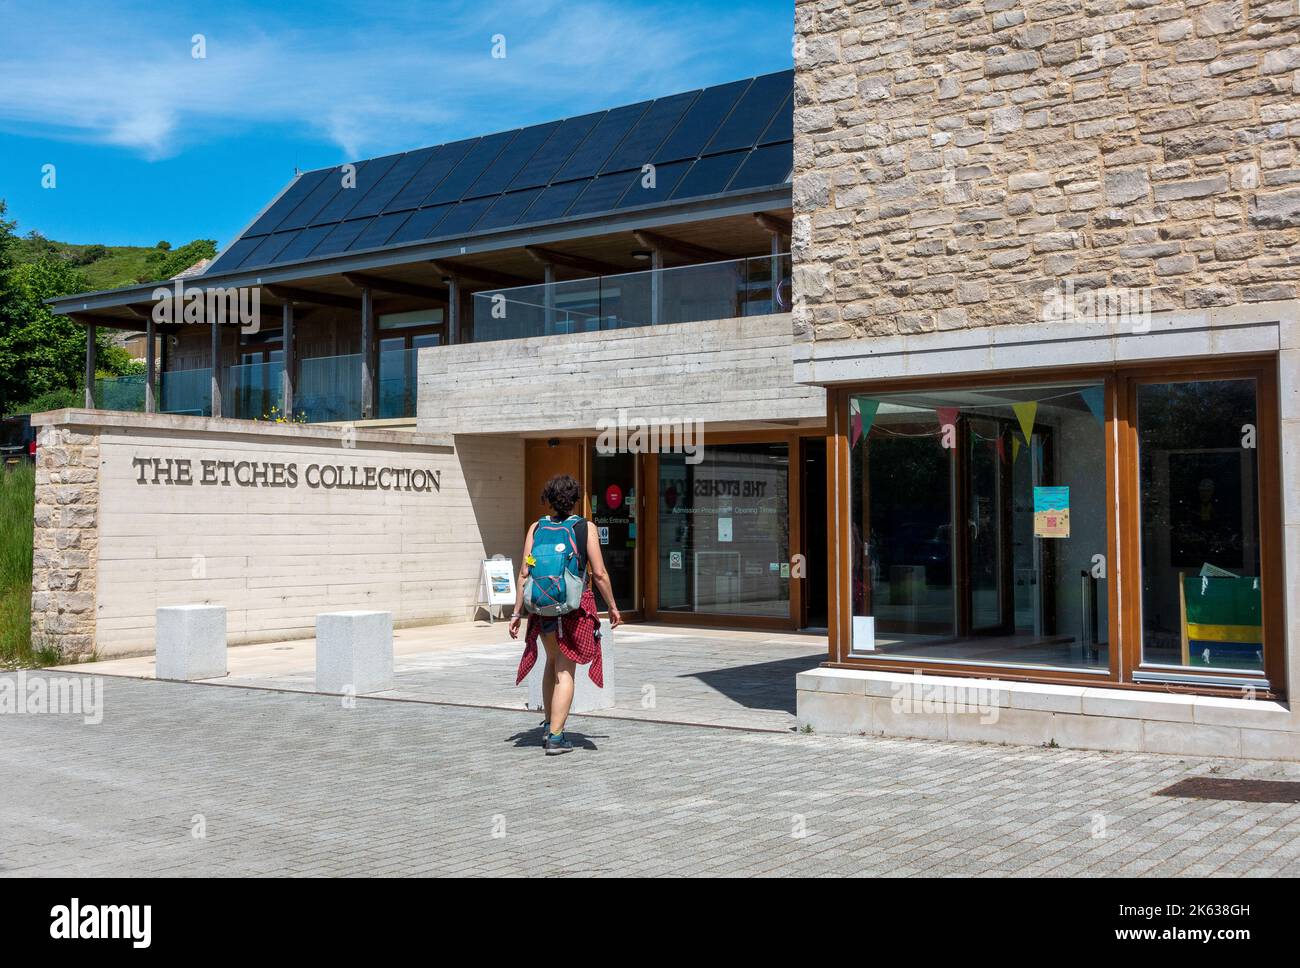 The Etches Collection building exterior, an independent fossil museum located in the village of Kimmeridge on the Isle of Purbeck, Dorset, England, UK Stock Photo